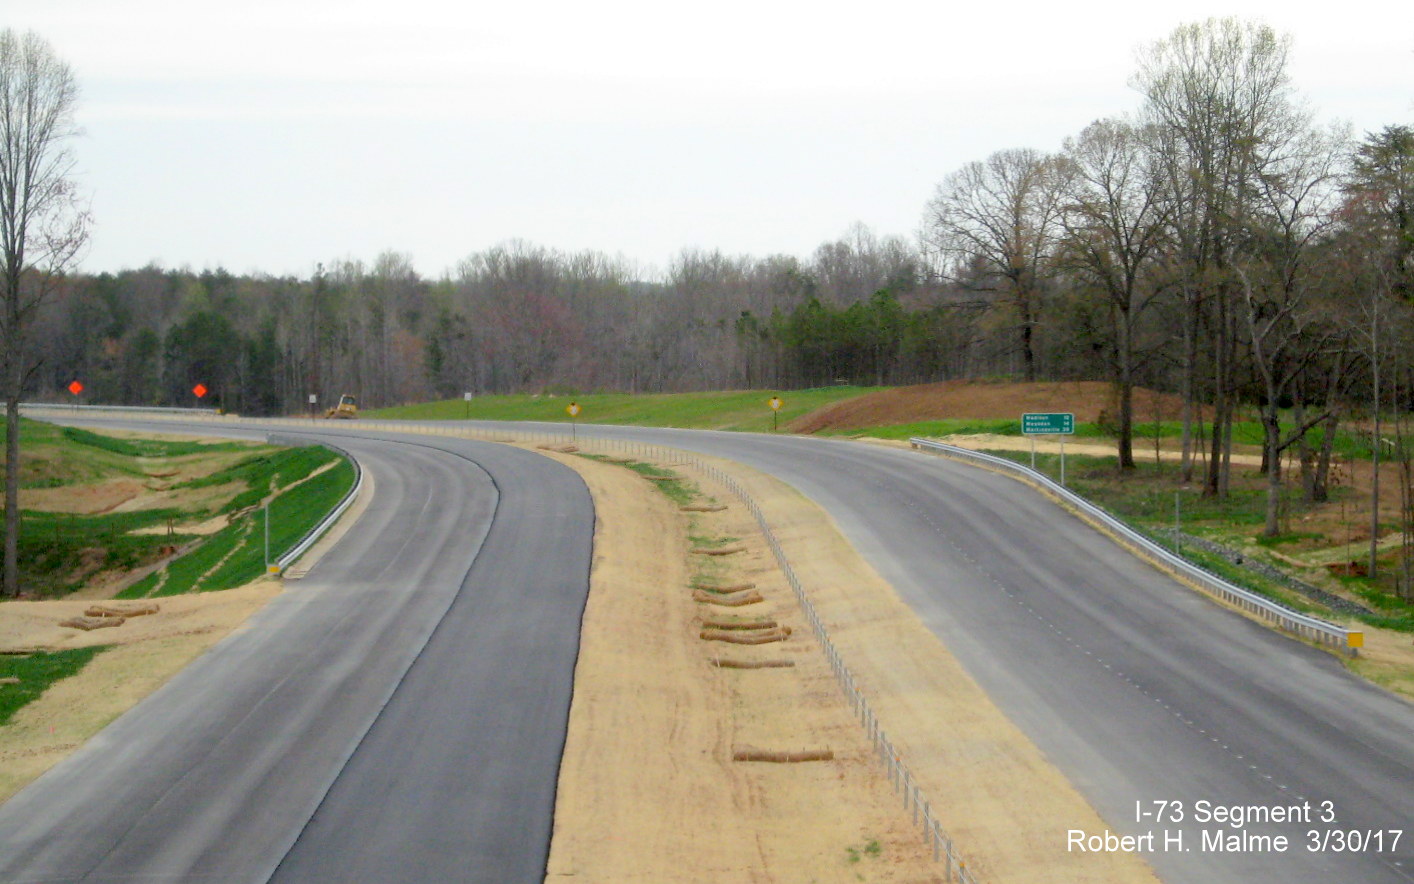 Image taken of view north from Deboe Rd bridge over future I-73 lanes under construction in Guilford County